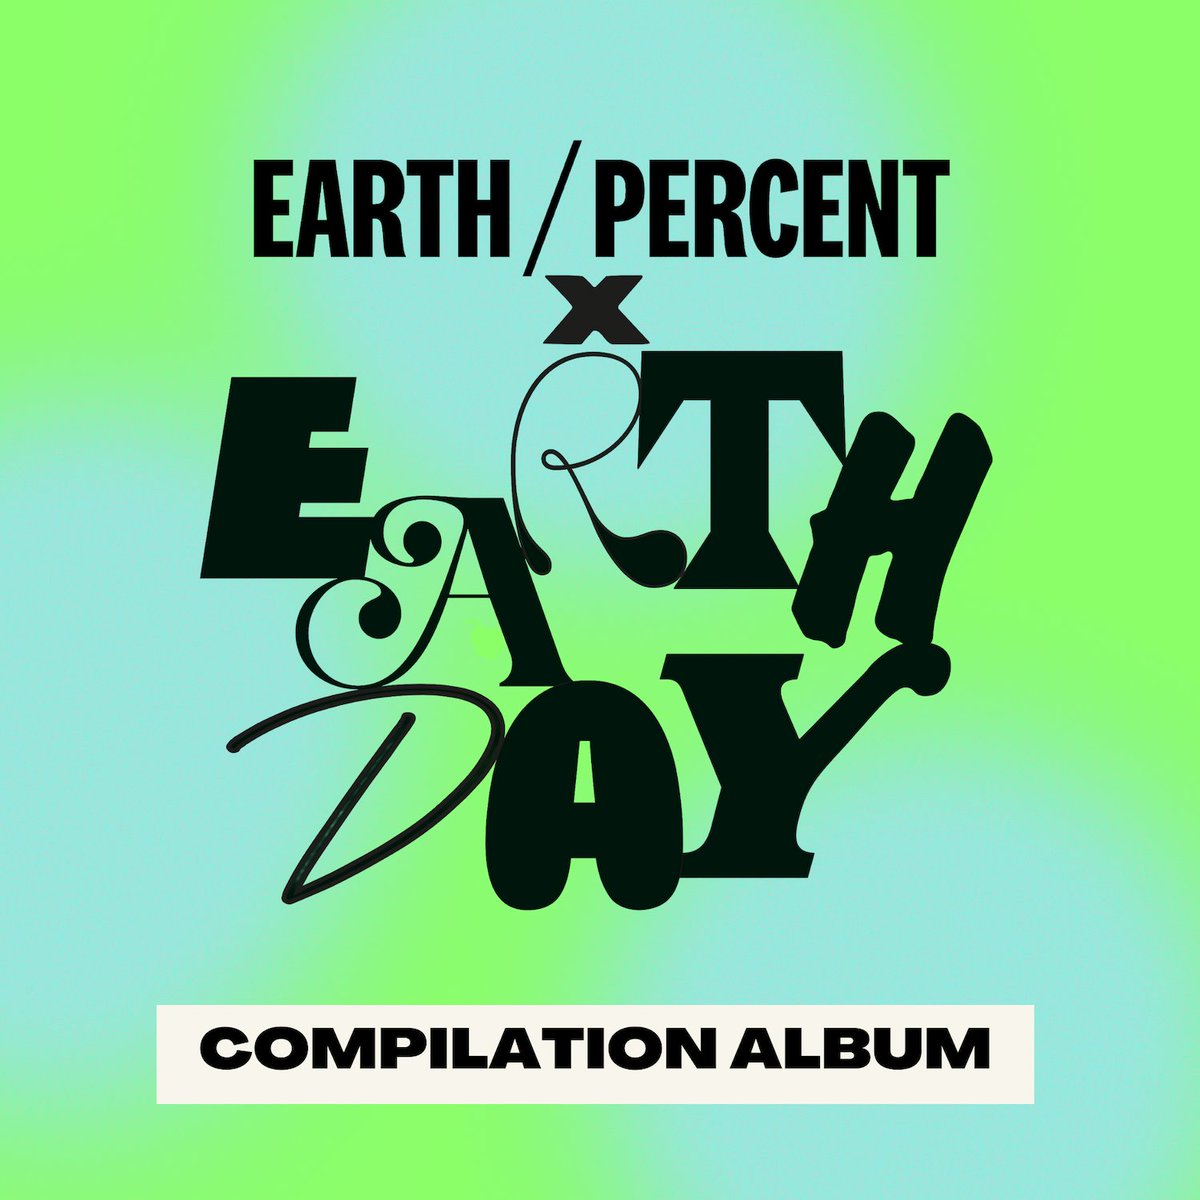 NOW LIVE! You have 24 HOURS ONLY to get your hands on almost 100 of our Earth Day tracks in a one-off  #EarthPercentEarthDay Compilation Album today on #BandcampFriday. 

Buy the album here for just £25: earthpercent.bandcamp.com
#NOMUSICONADEADPLANET